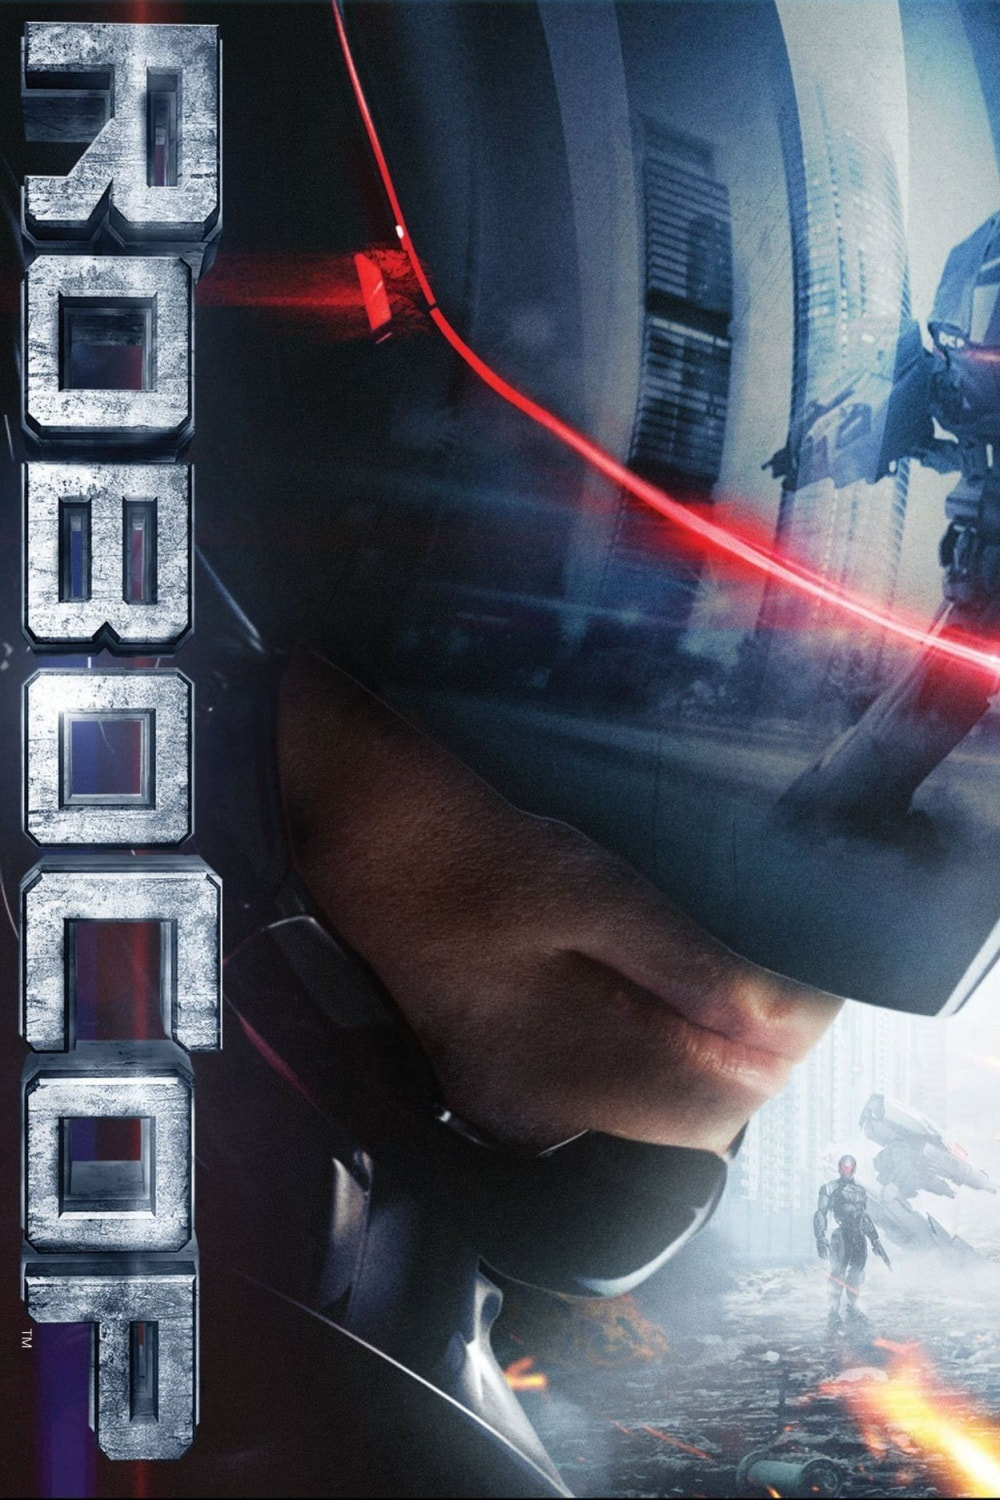 Poster for Robocop 2014 remake